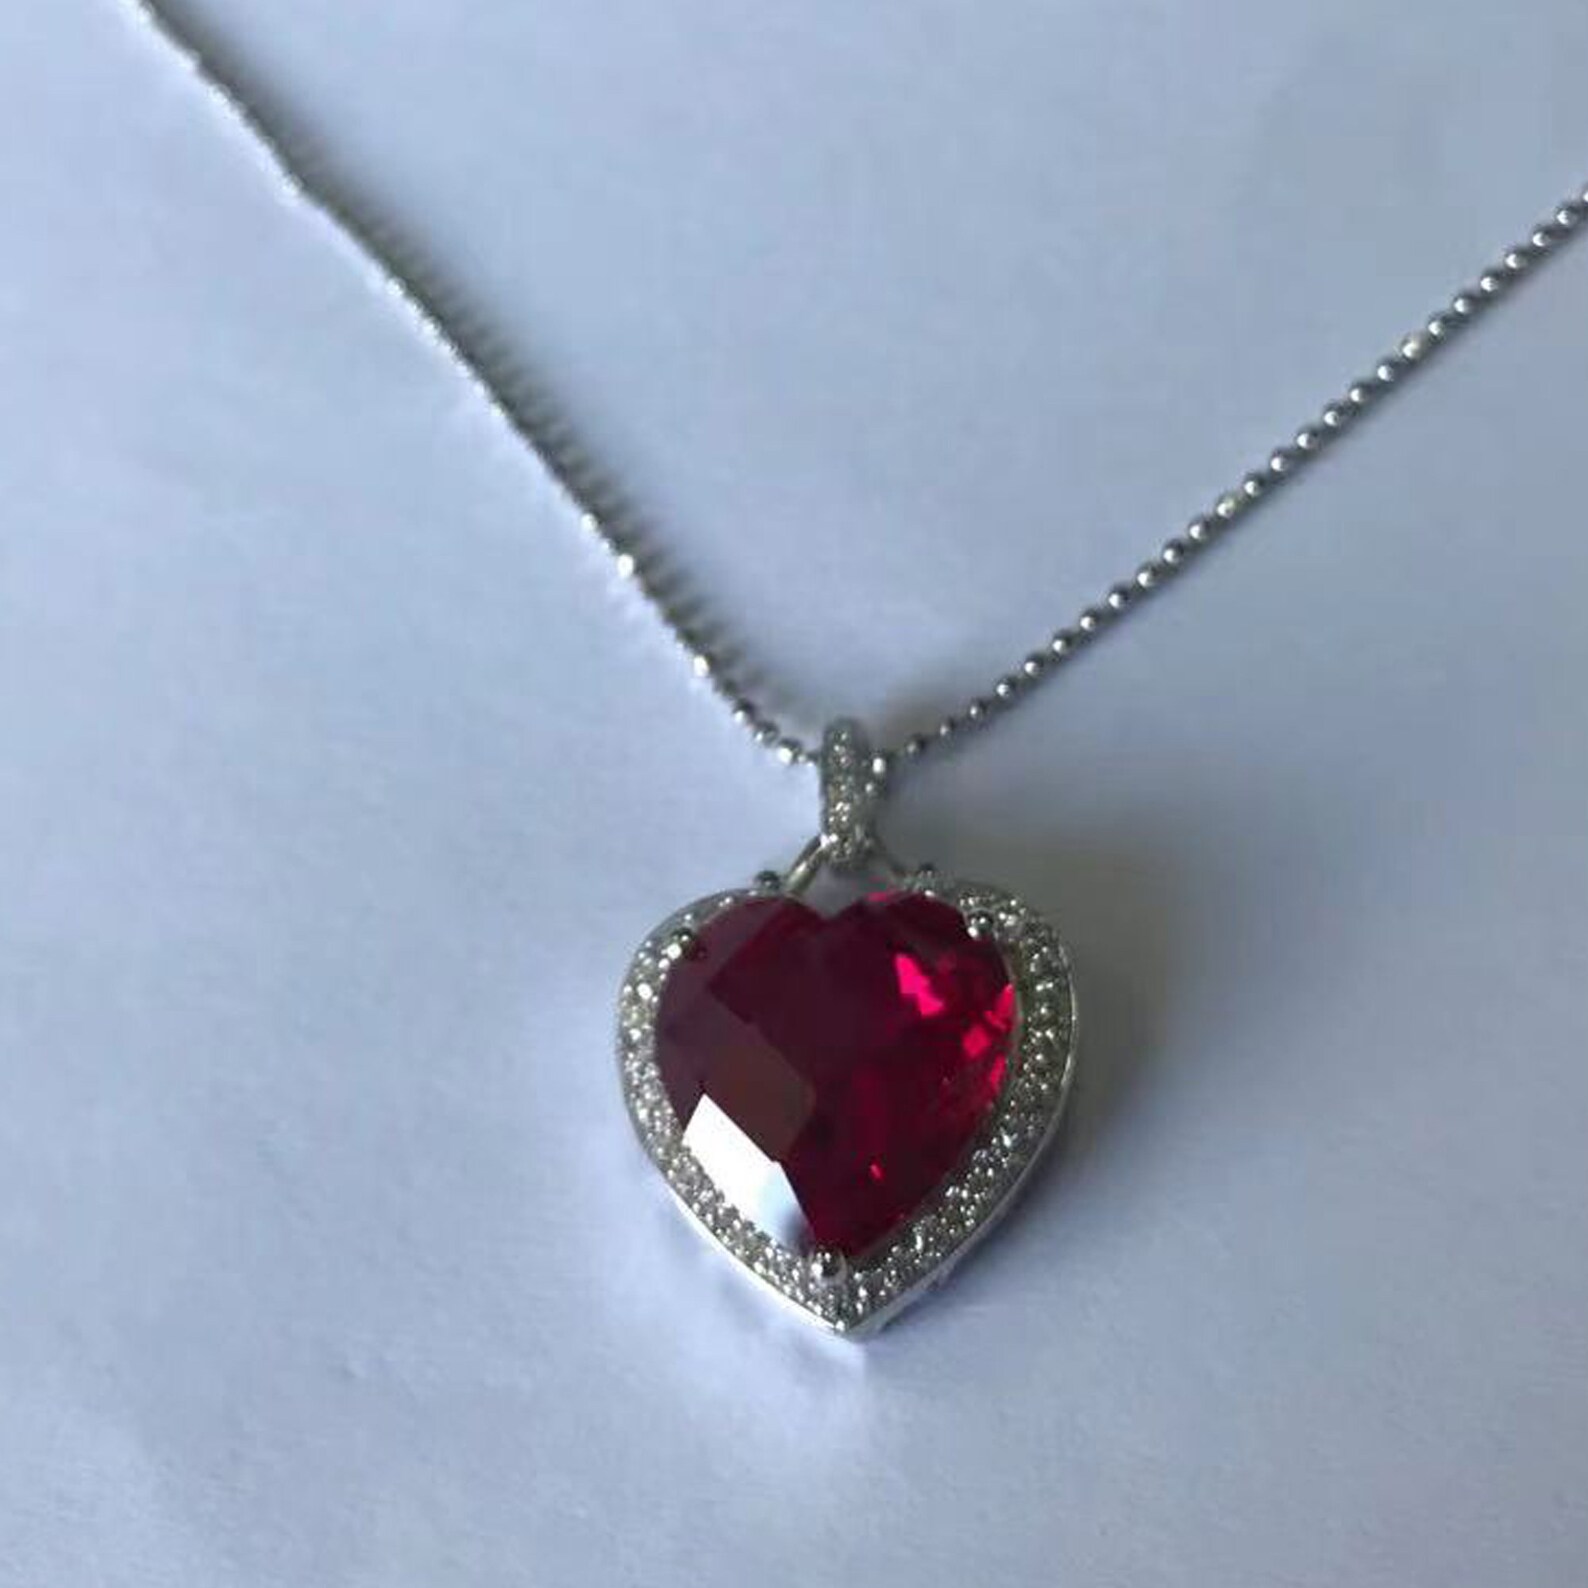 Ruby Heart Pendant Necklaceheart Pendant Necklacecubic | Etsy